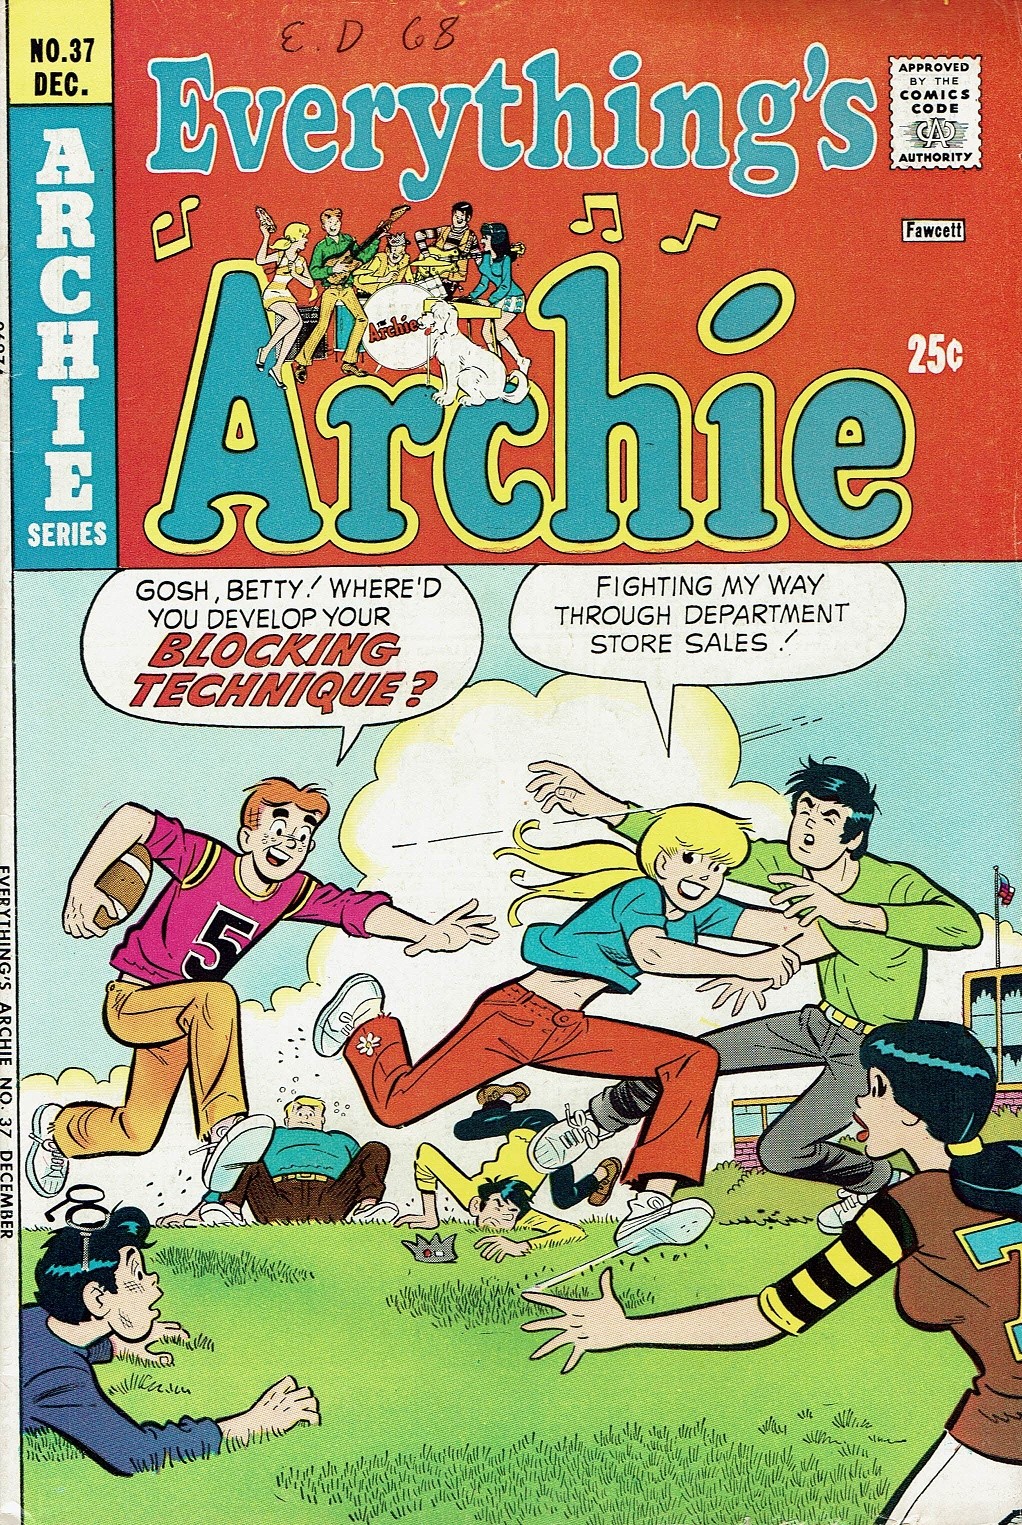 Read online Everything's Archie comic -  Issue #37 - 1